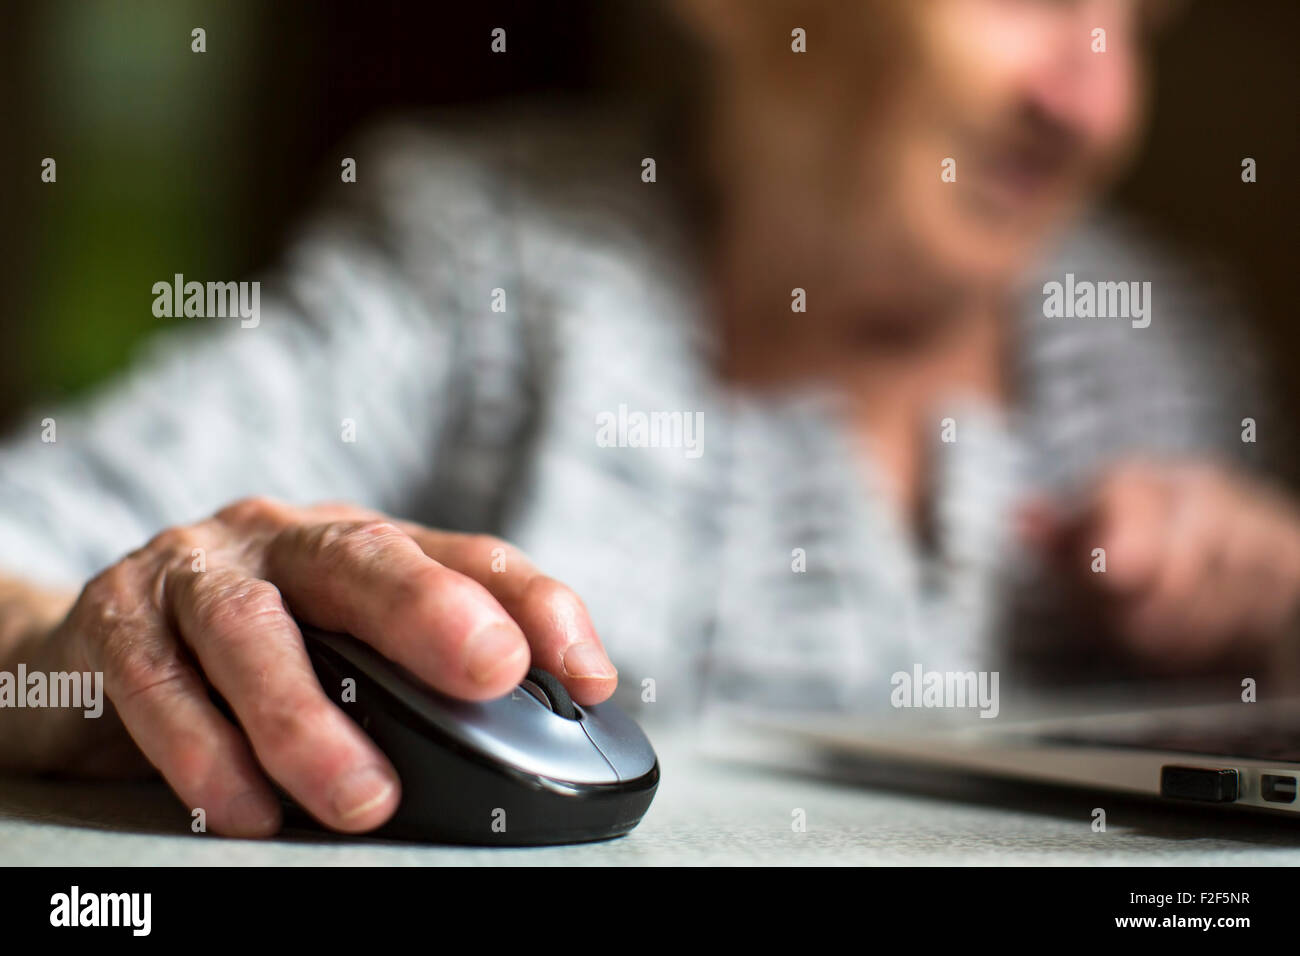 Closeup of the hand of an old woman holding a computer mouse. Stock Photo